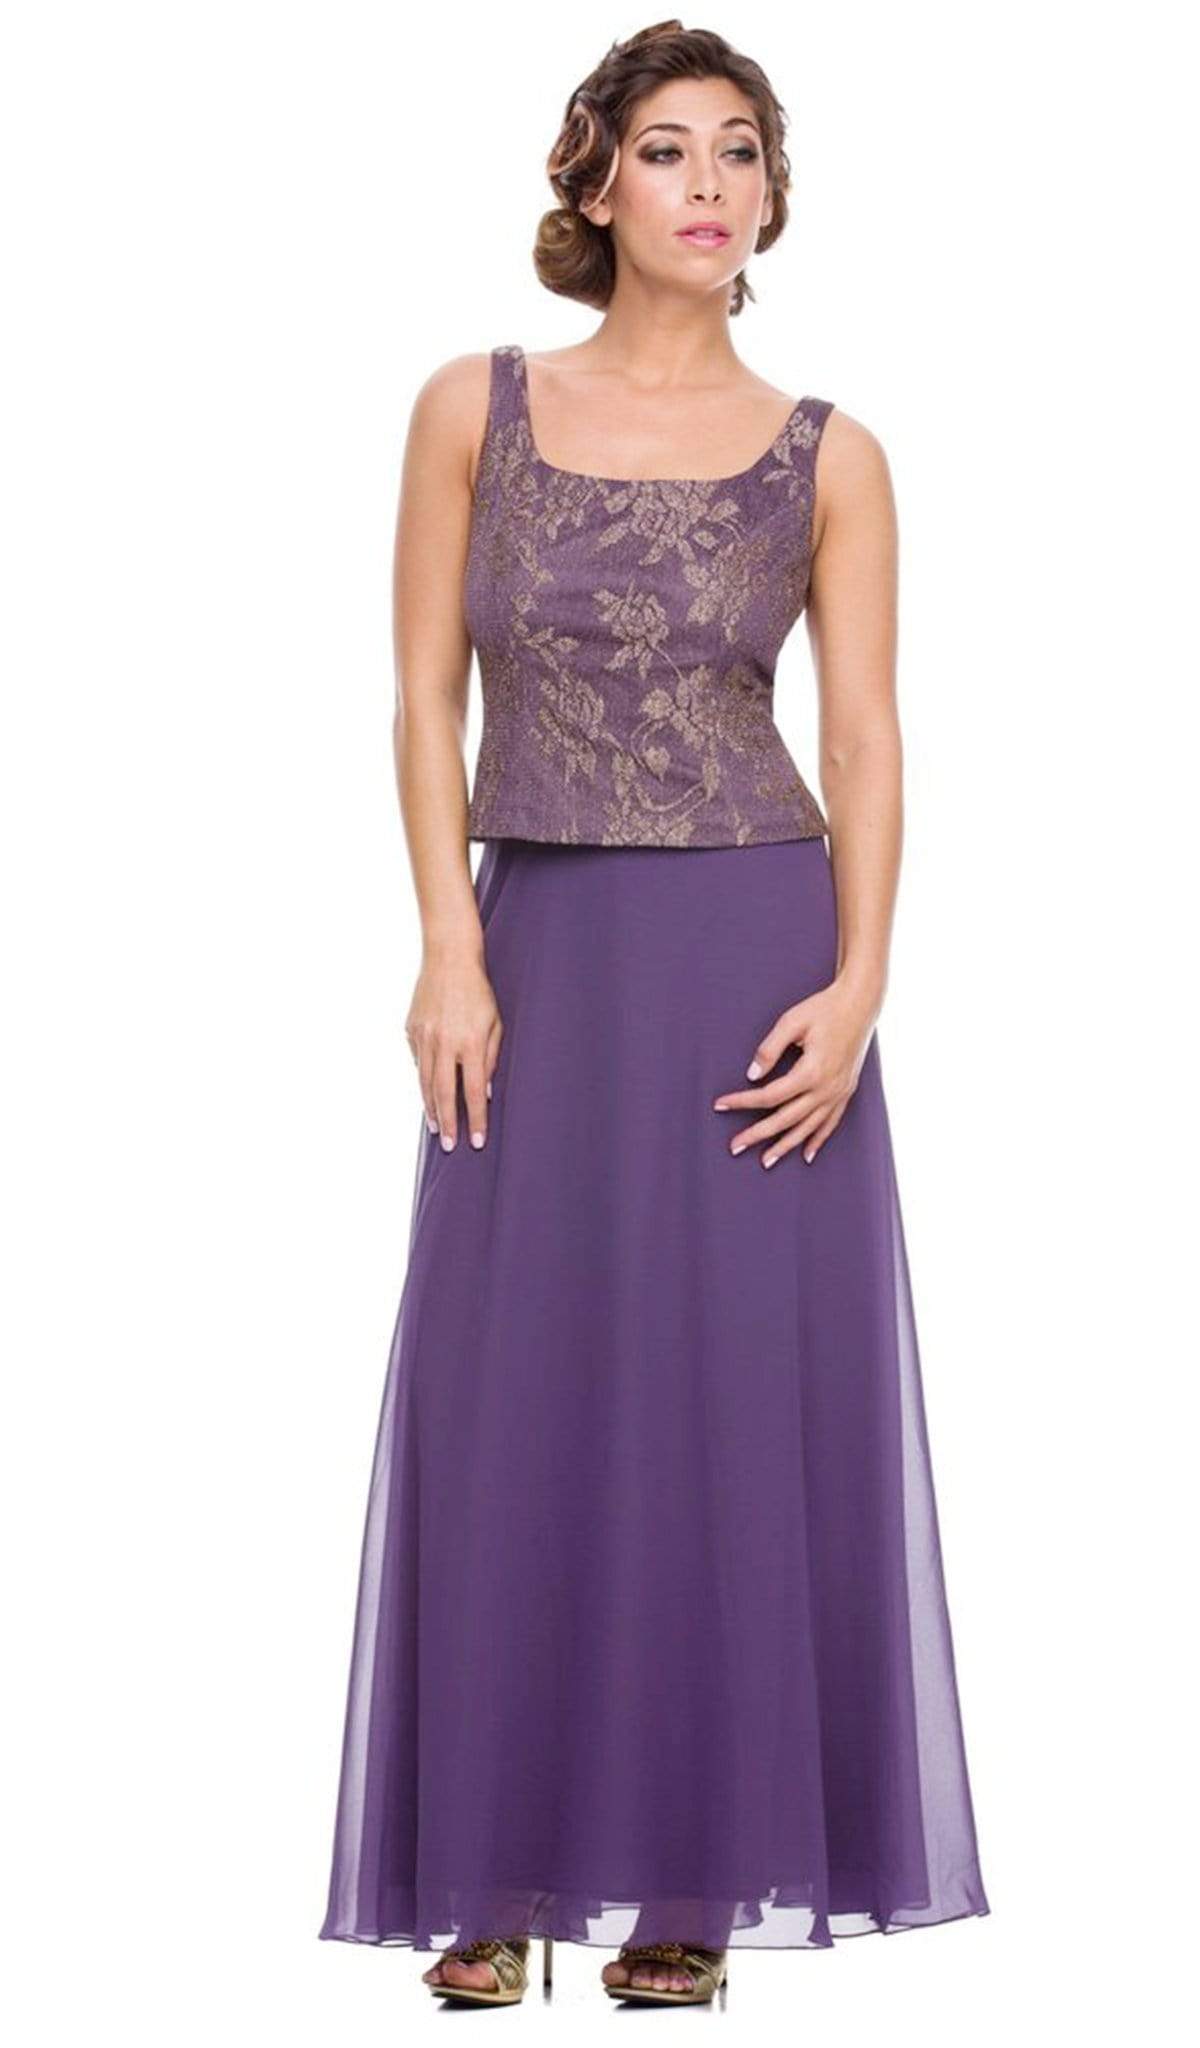 Nox Anabel - 5076 Lace Dress with Sheer Jacket Mother of the Bride Dresses